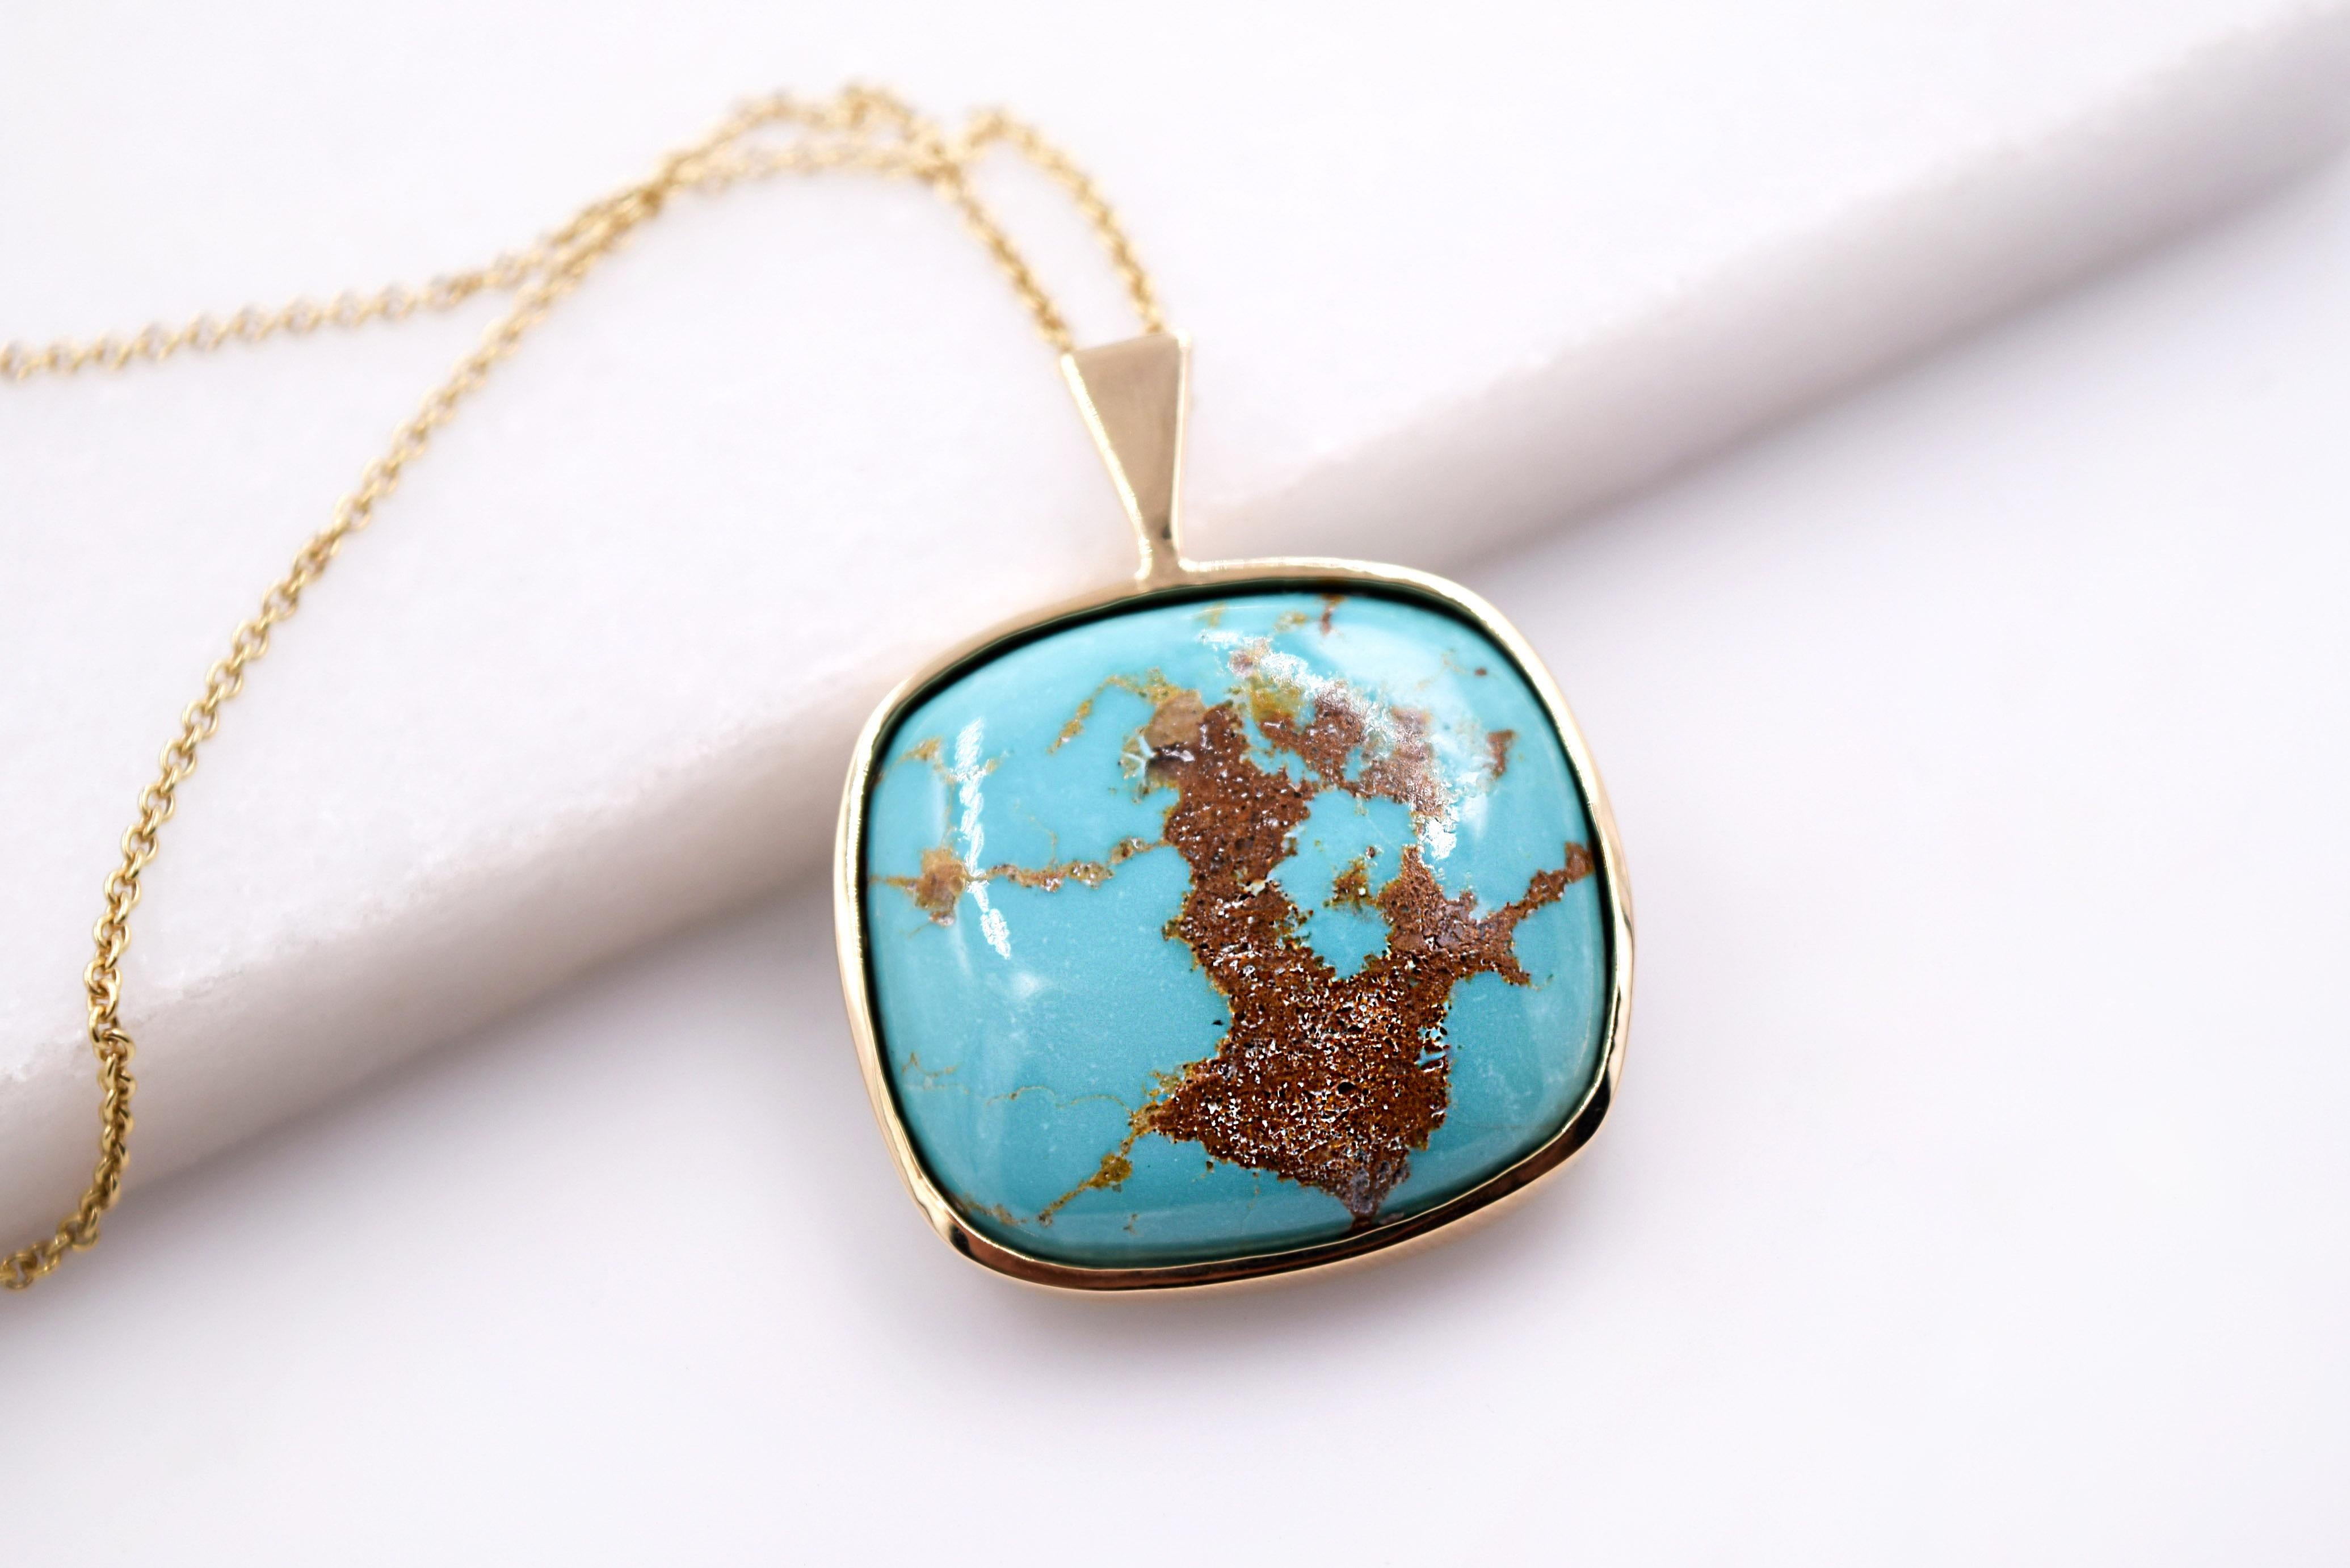 - Highly Collectible Morenci Turquoise Pendant 
- Cabochon Cut 
- Set in 14K High Polished Yellow Gold Bezel
- Hangs on an 18 Inch 14 Karat Yellow Gold Cable Chain 
- Chain can be requested in any length